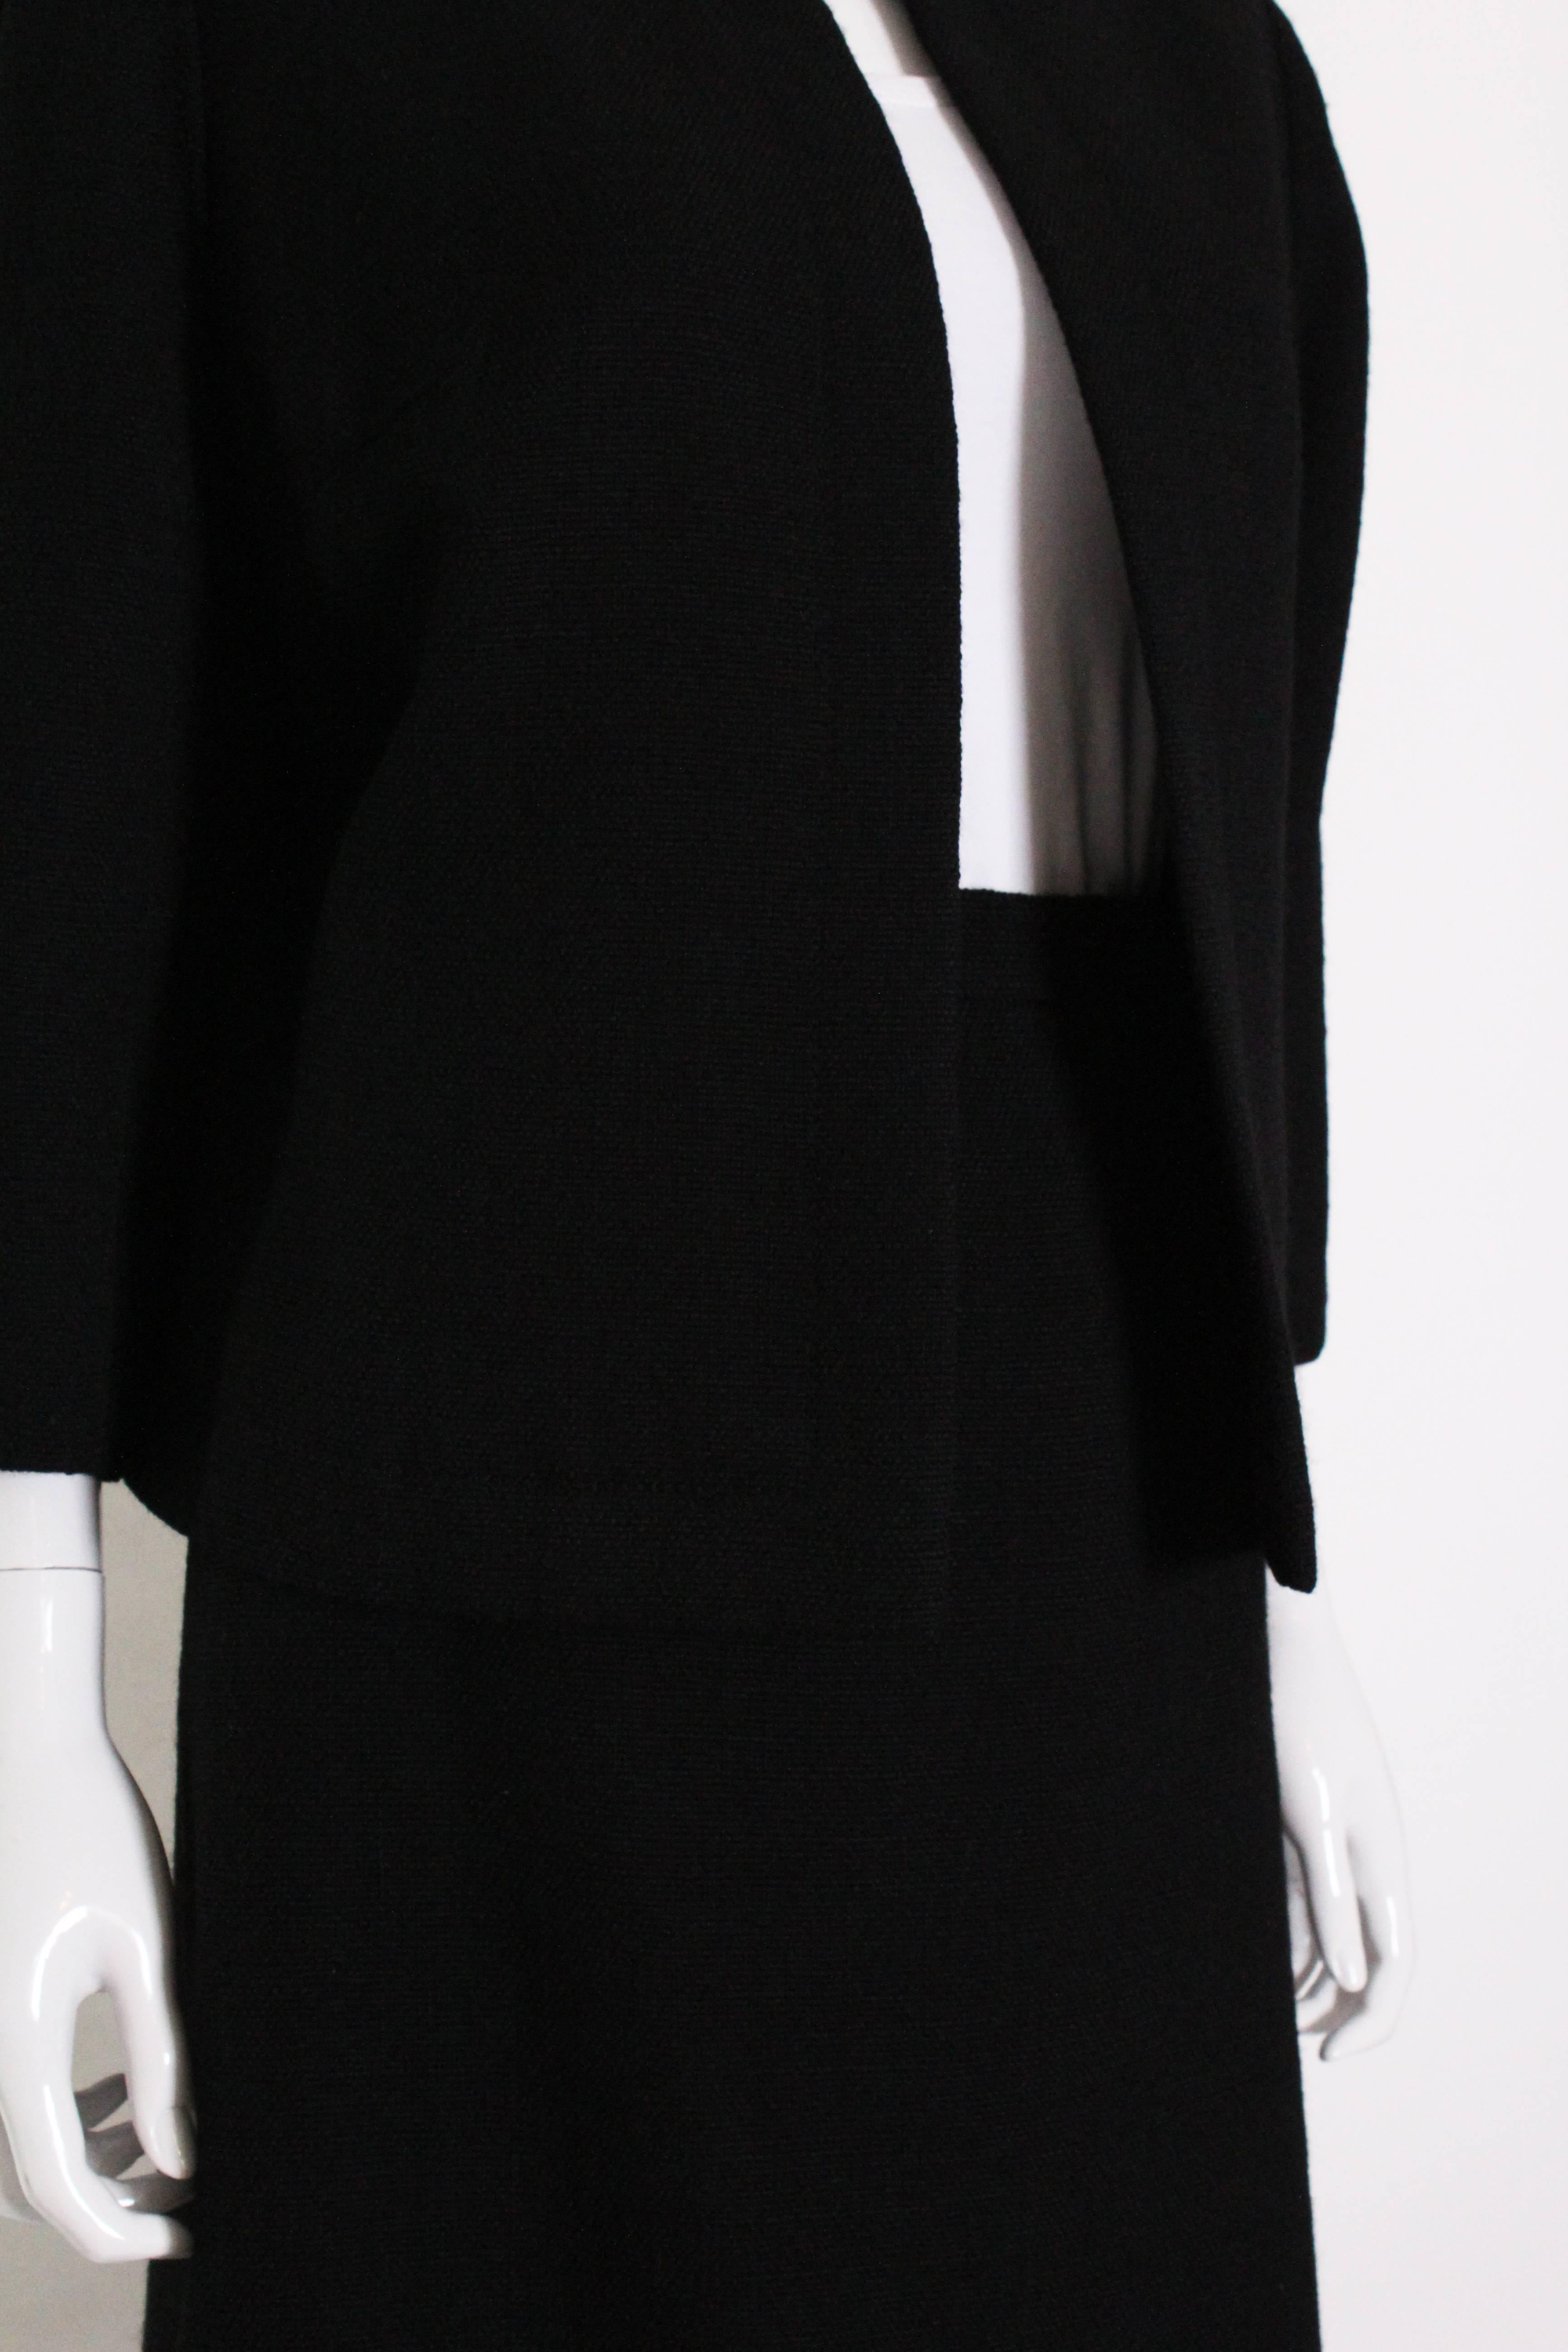 Vintage Christian Dior Black Skirt Suit In Good Condition In London, GB